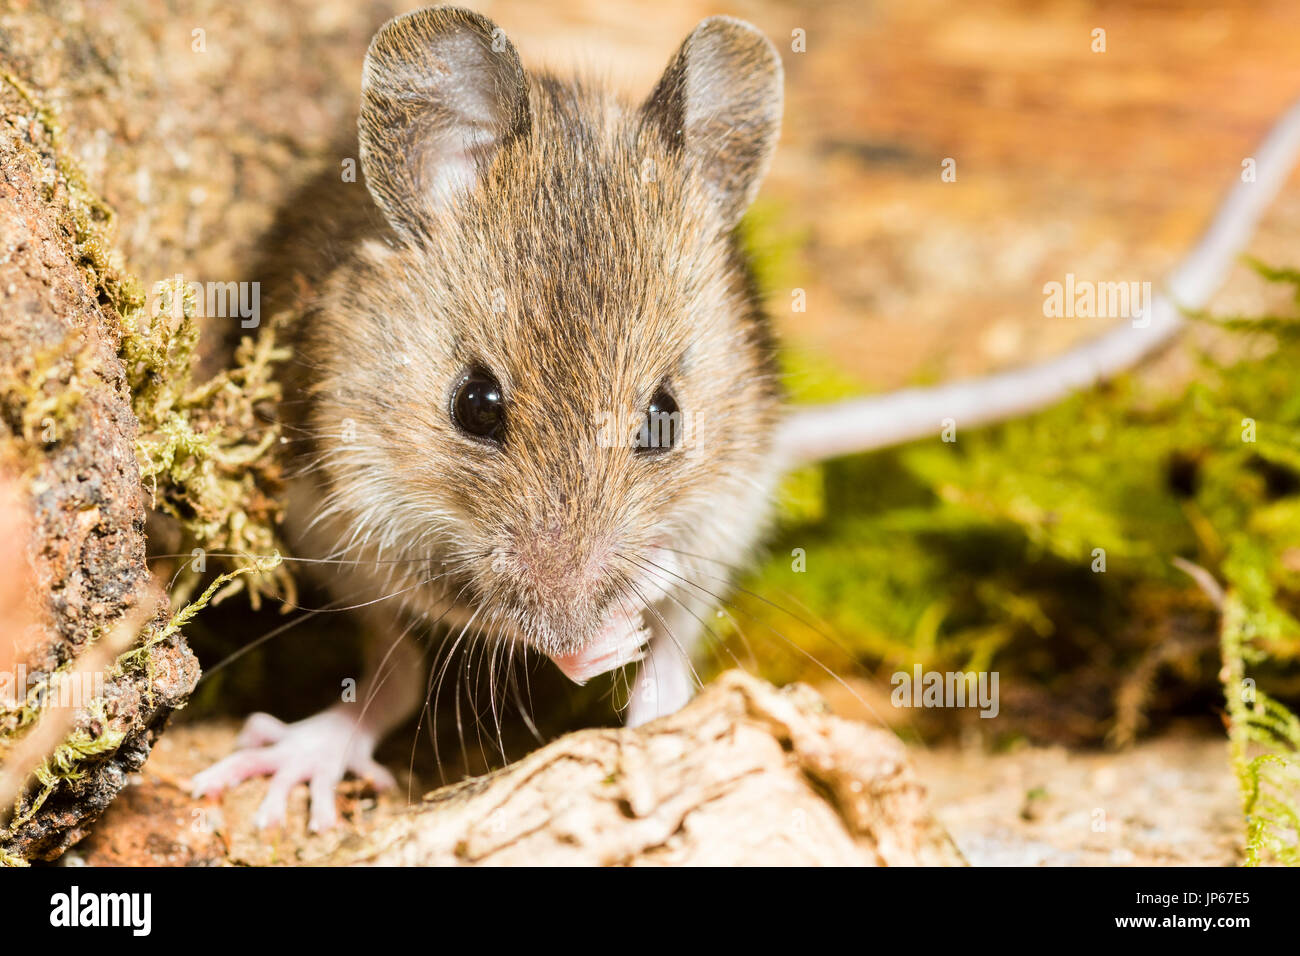 Wood mouse in a natural setting Stock Photo